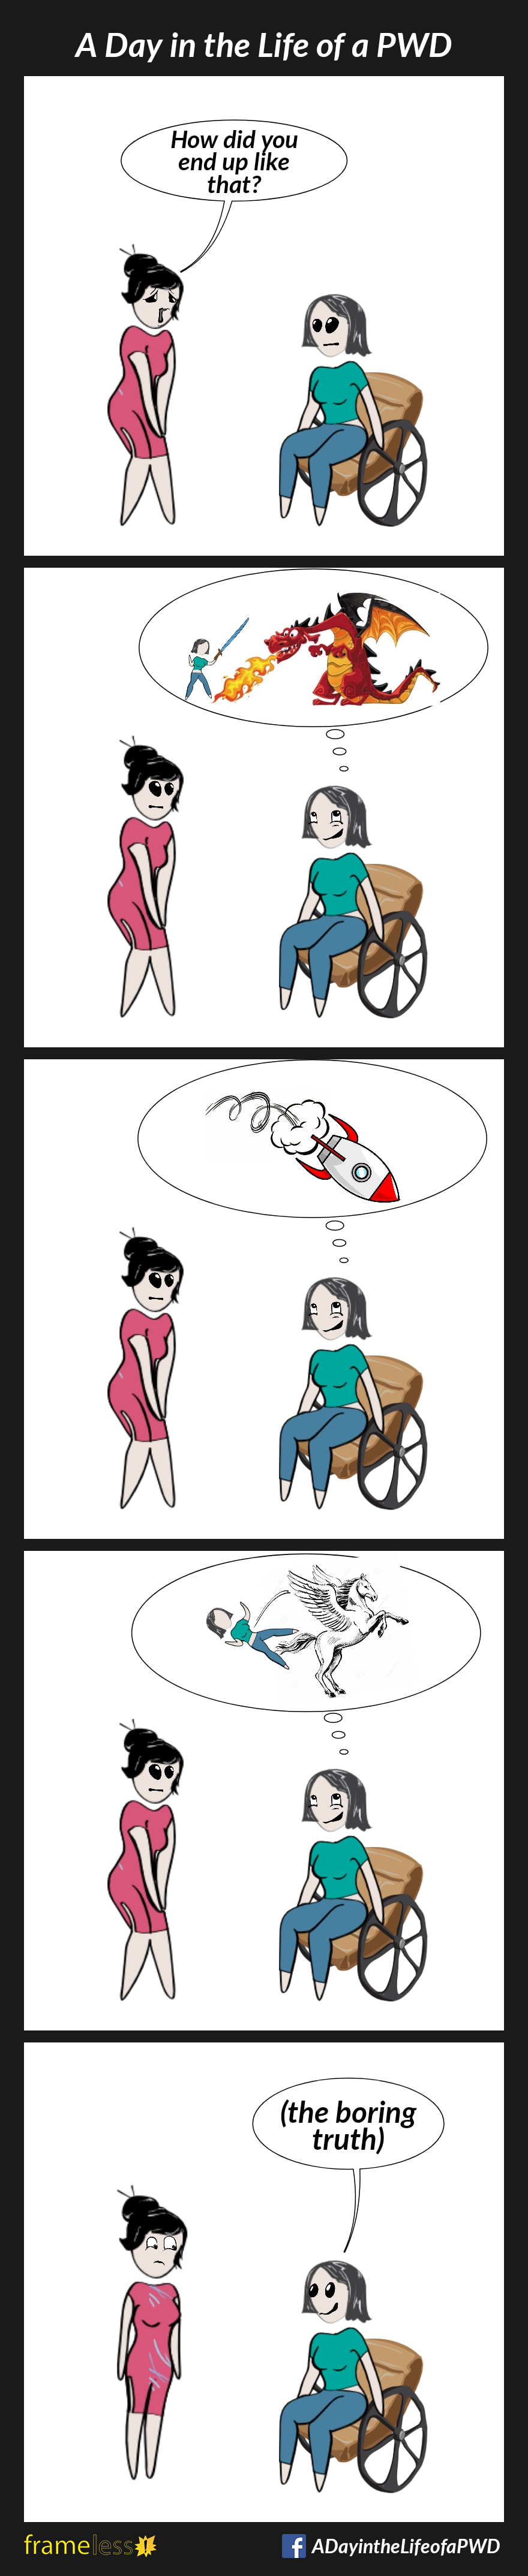 COMIC STRIP 
A Day in the Life of a PWD (Person With a Disability) 

Frame 1:
A woman in a wheelchair is talking to an acquaintance. 
ACQUAINTANCE (sympathetically): How did you end up like that?

Frame 2:
A thought bubble appears over the woman's head. 
Inside the bubble, she is brandishing a sword against a fire-breathing dragon.

Frame 3:
The thought bubble scene changes to a crashing rocket ship.

Frame 4:
The scene changes to her falling backwards off a launching Pegasus.

Frame 5:
The thought bubble disappears, and the woman tells the boring truth.